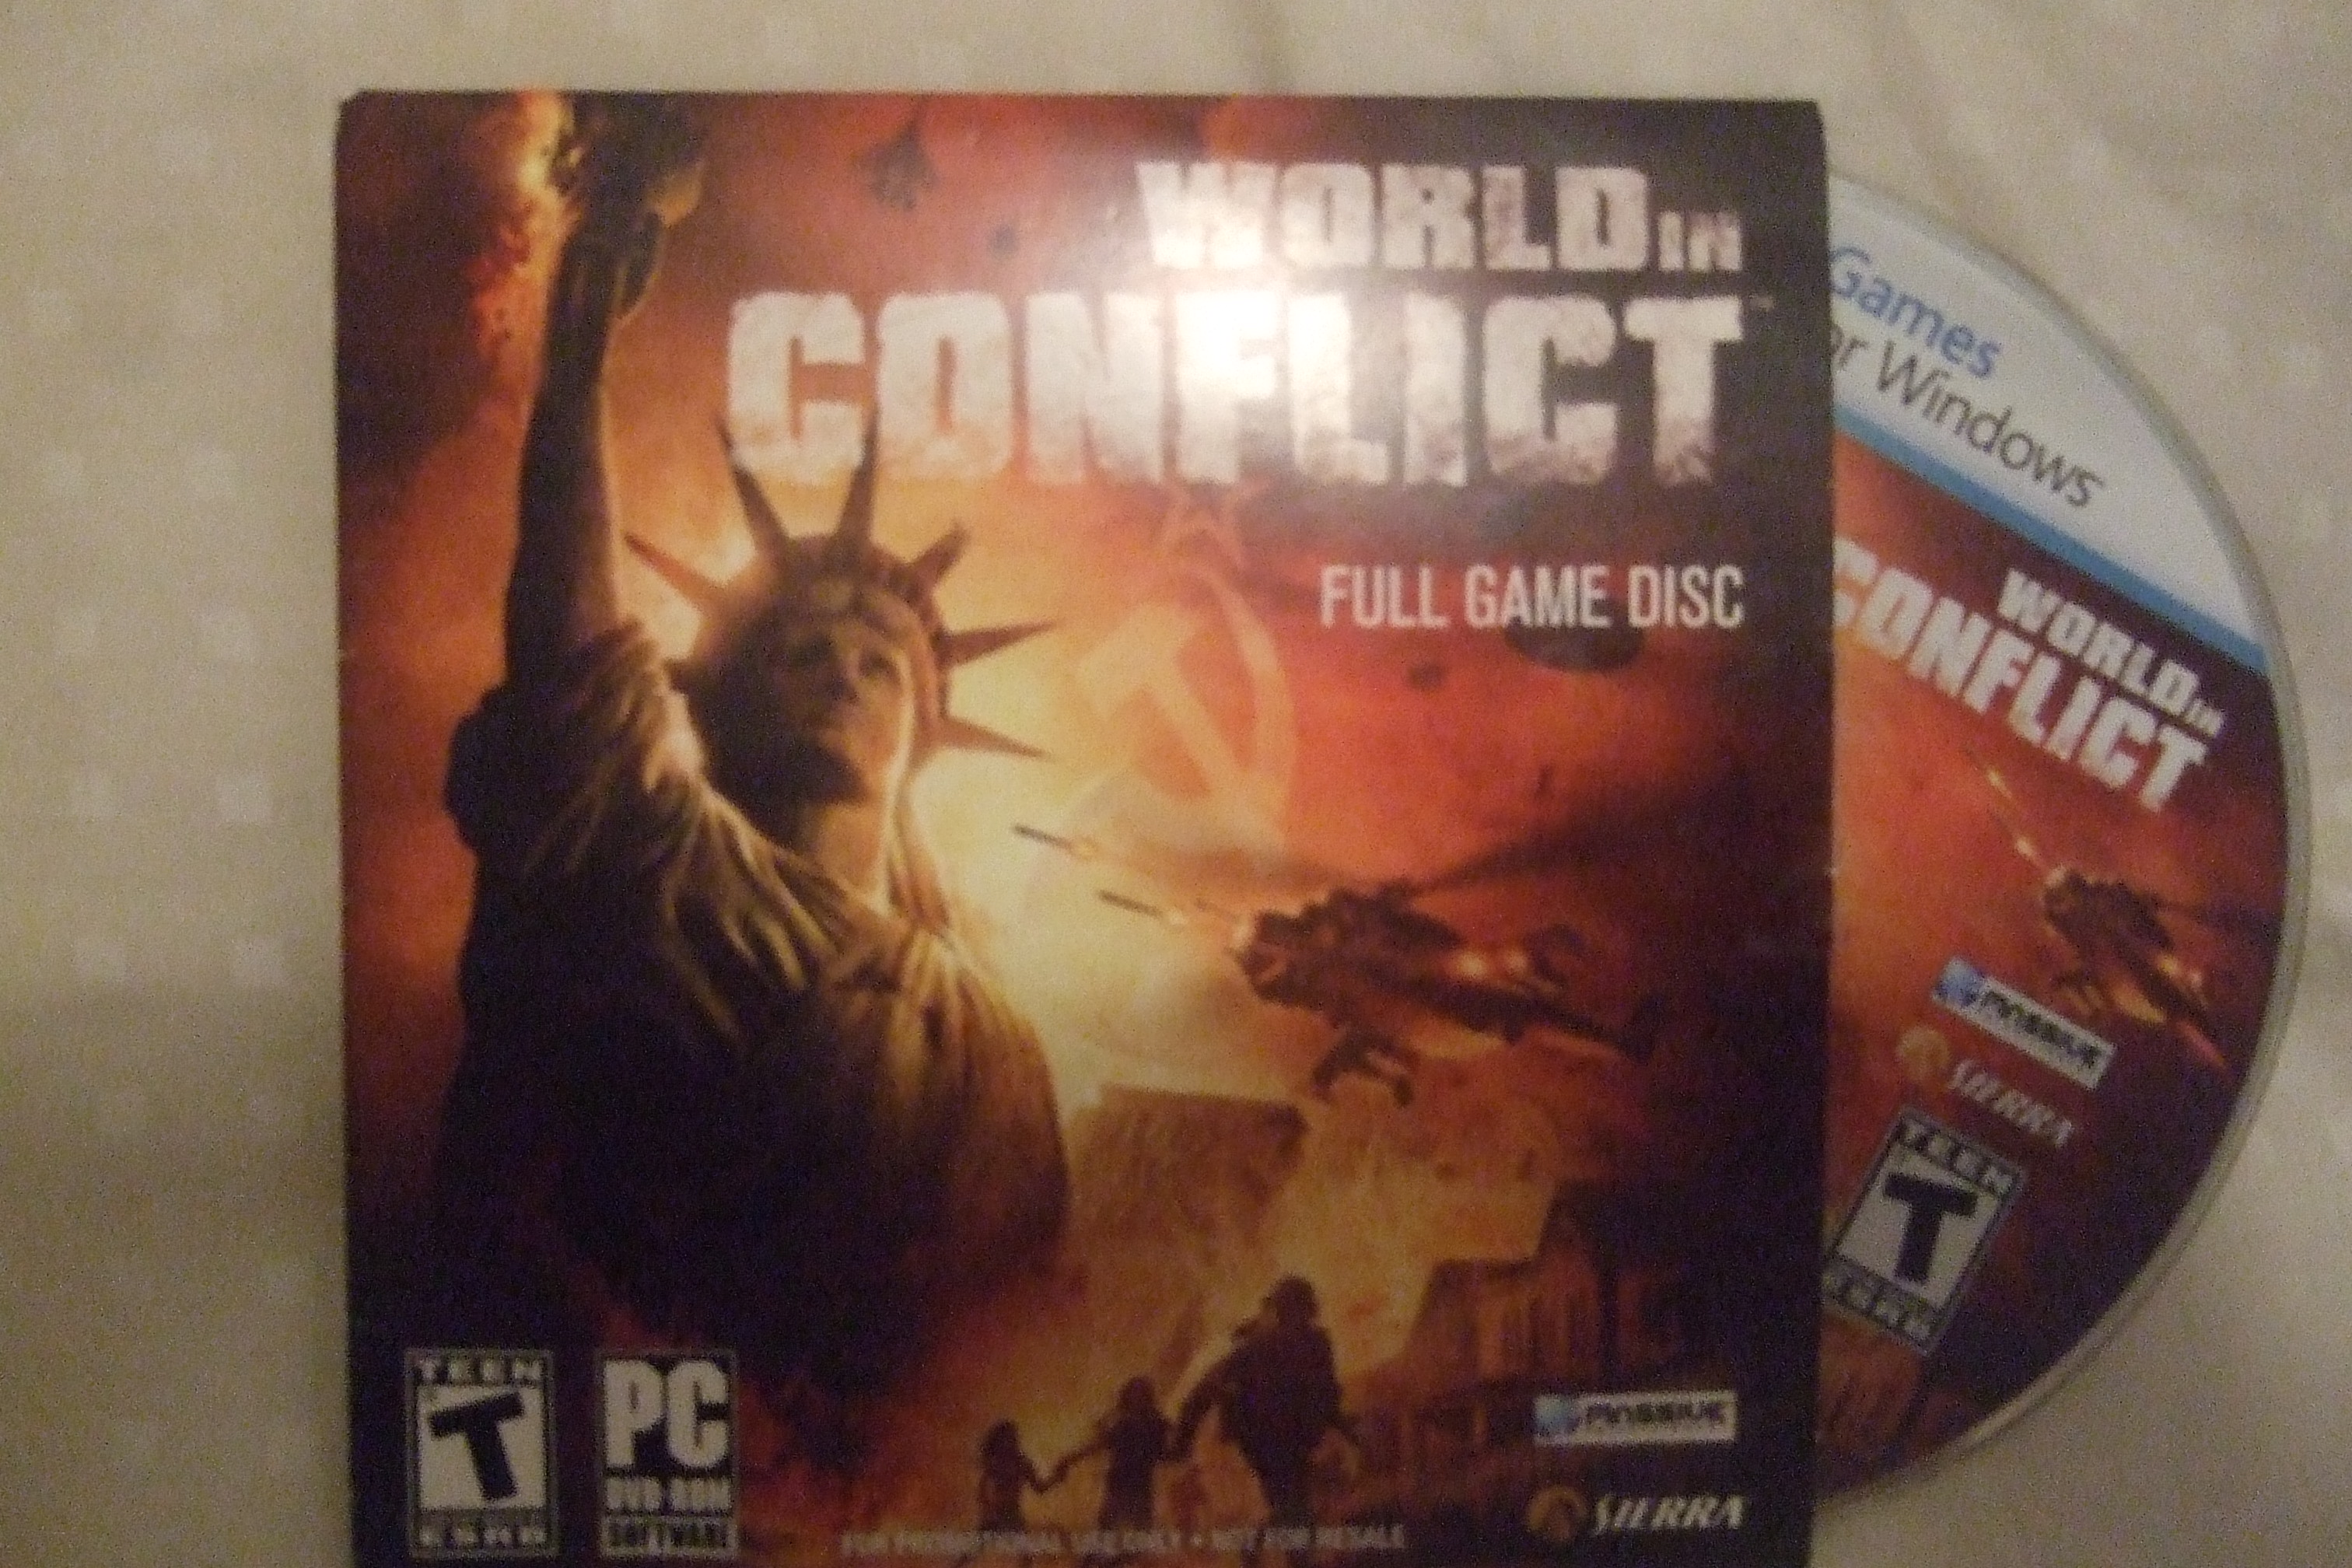 Here Is A Picture Of A Game For PC I Had For 3 Years... It's A Great Game..! This Is What It Looks Like If You Plan On Buying... Enjoy ;)